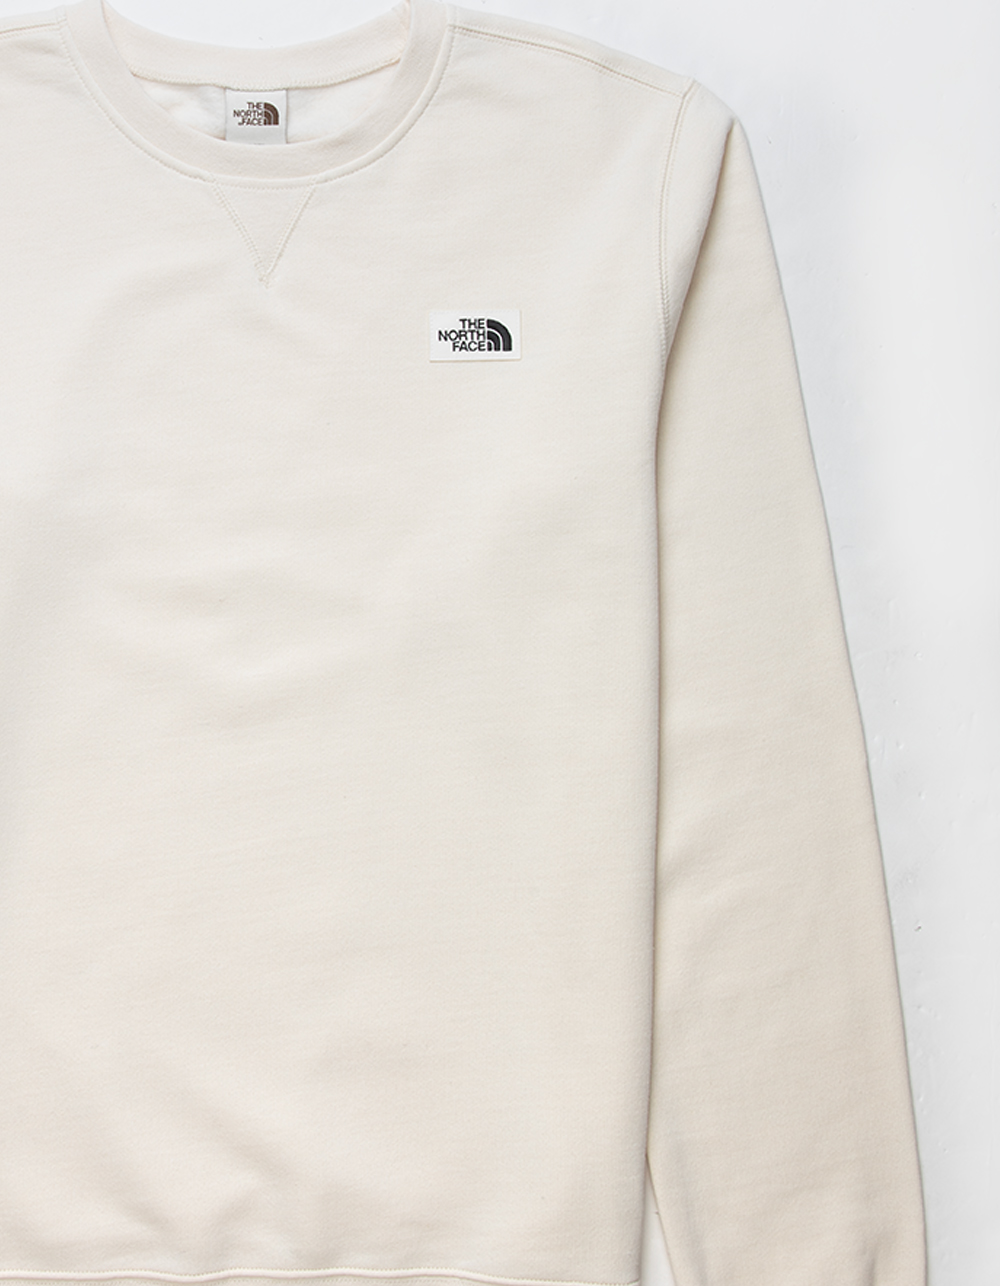 THE NORTH FACE Heritage Patch Mens Crewneck Sweatshirt - WHITE | Tillys